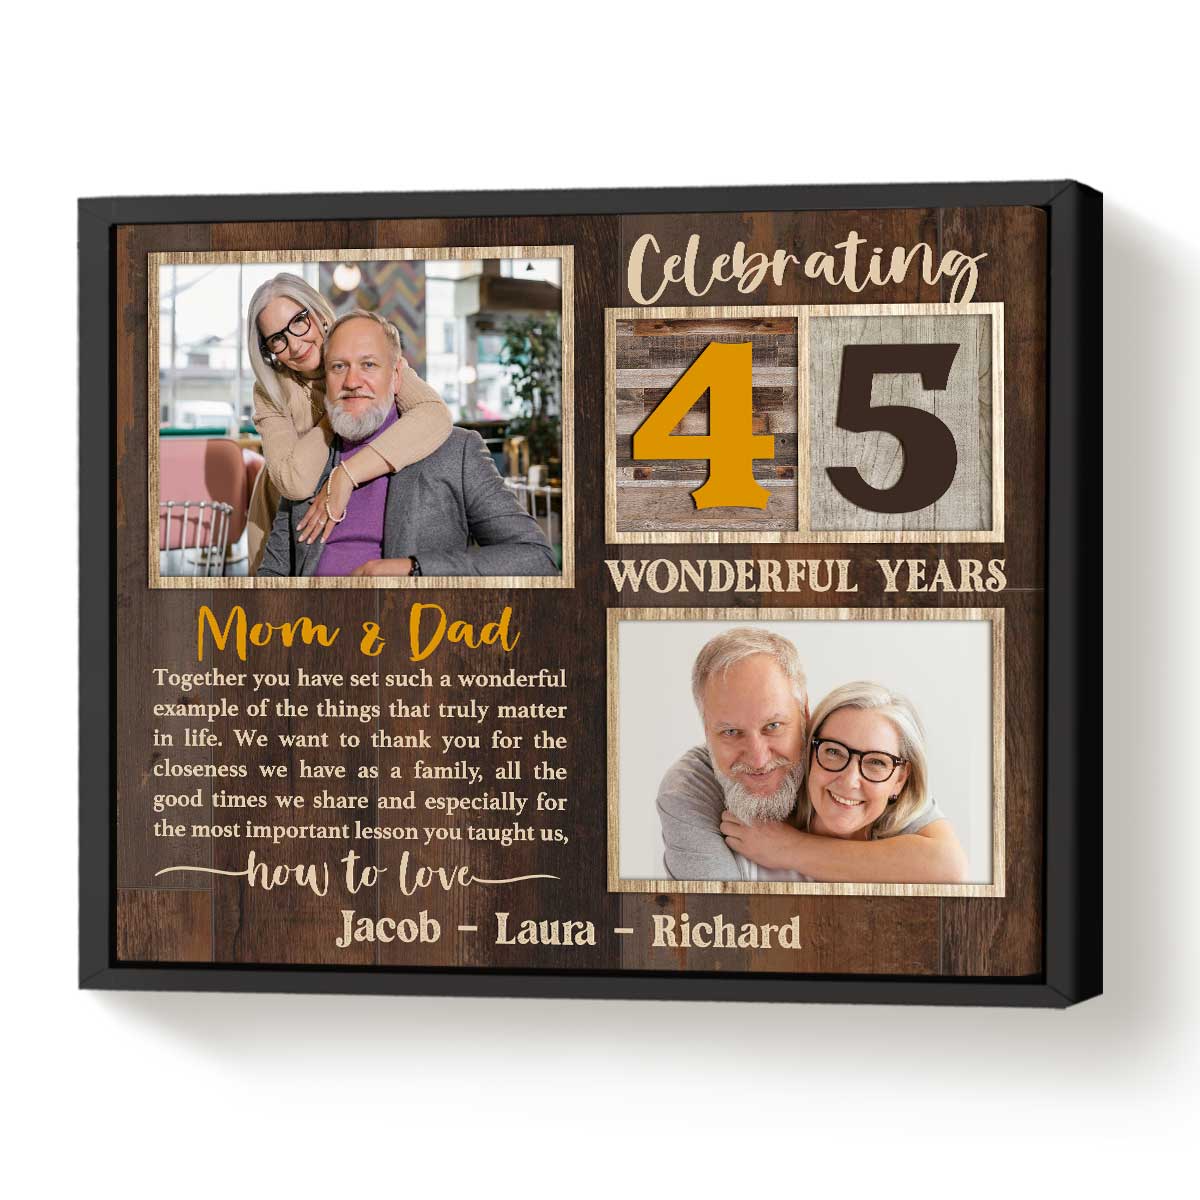 iMPACTGift customized gifts Personalize Photo Frame World best Couple Mom  Dad Anniversary Best Gift for Mummy papa Customised gifts (Size4x6)